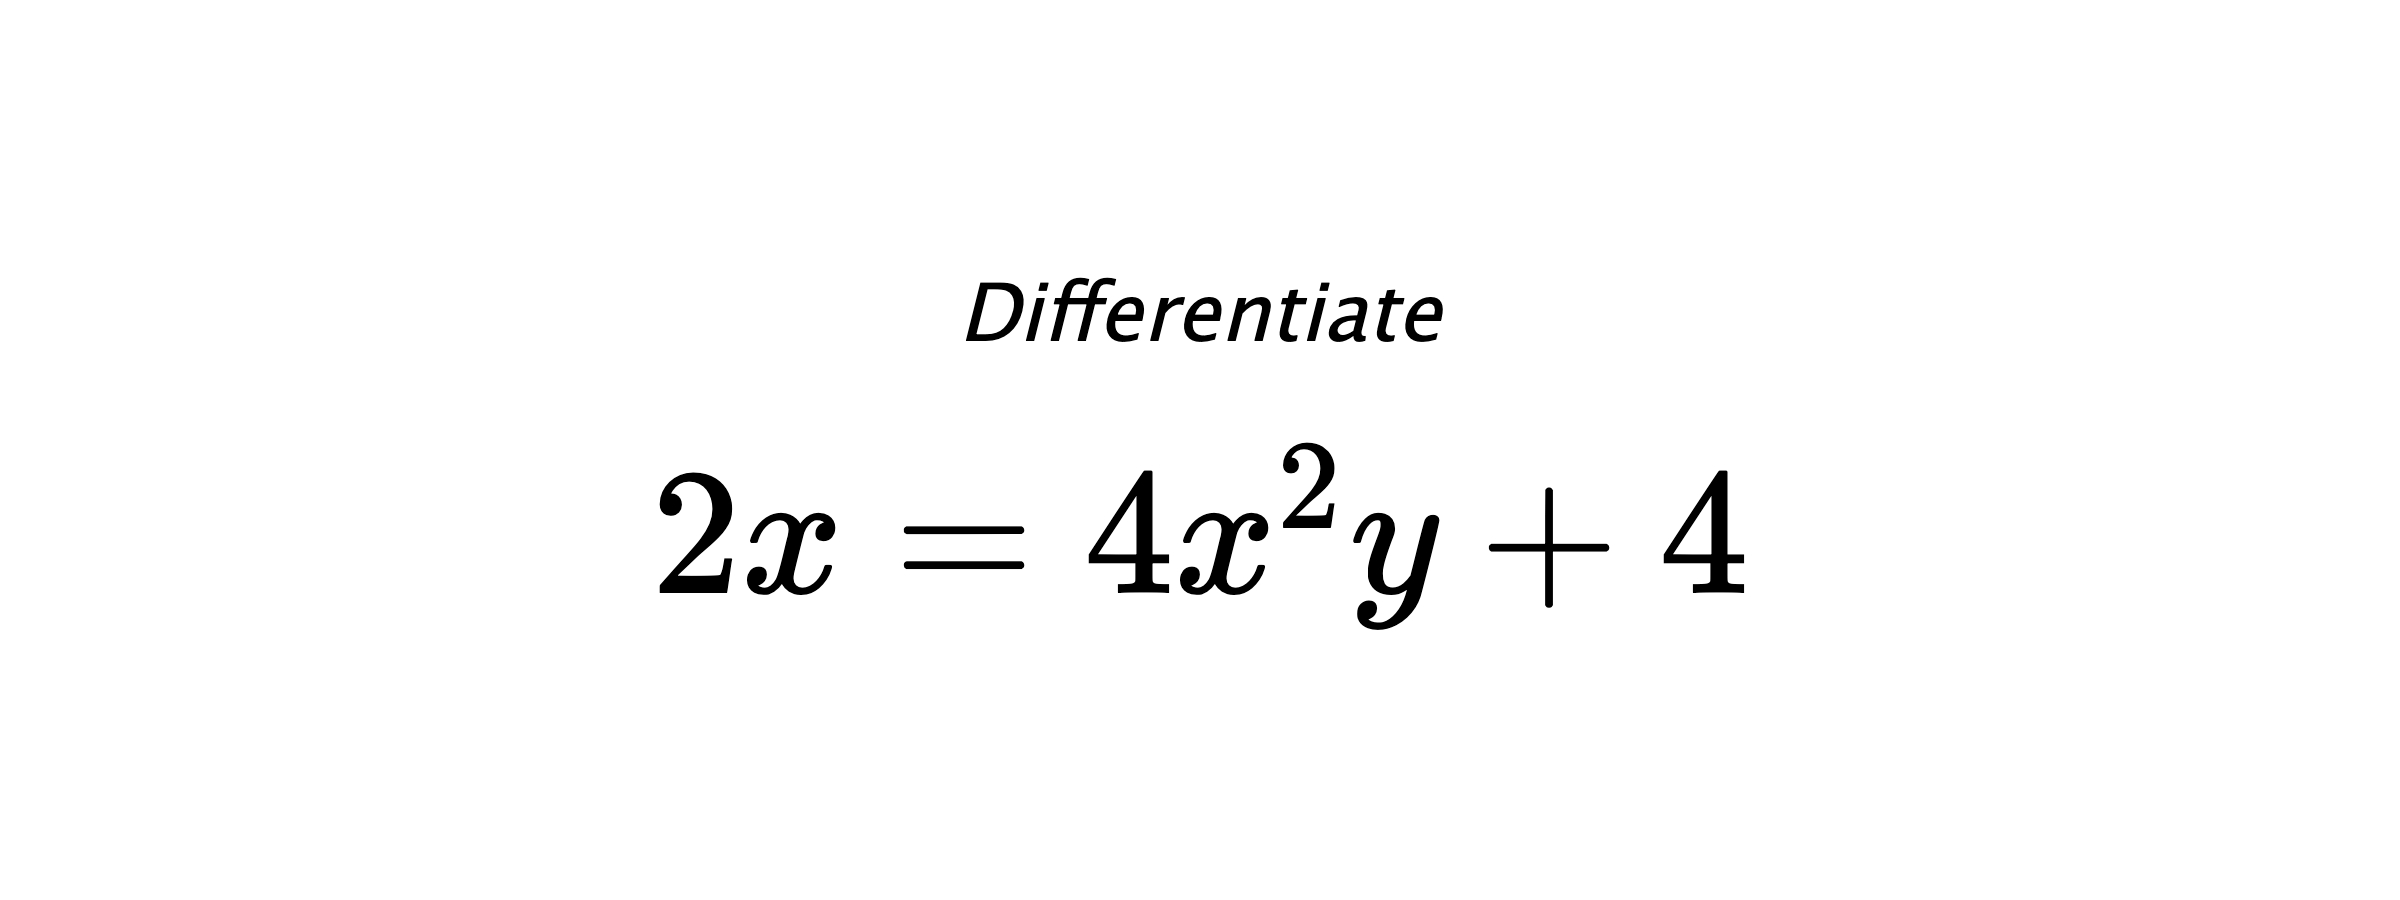 Differentiate $ 2x = 4x^2y+4 $